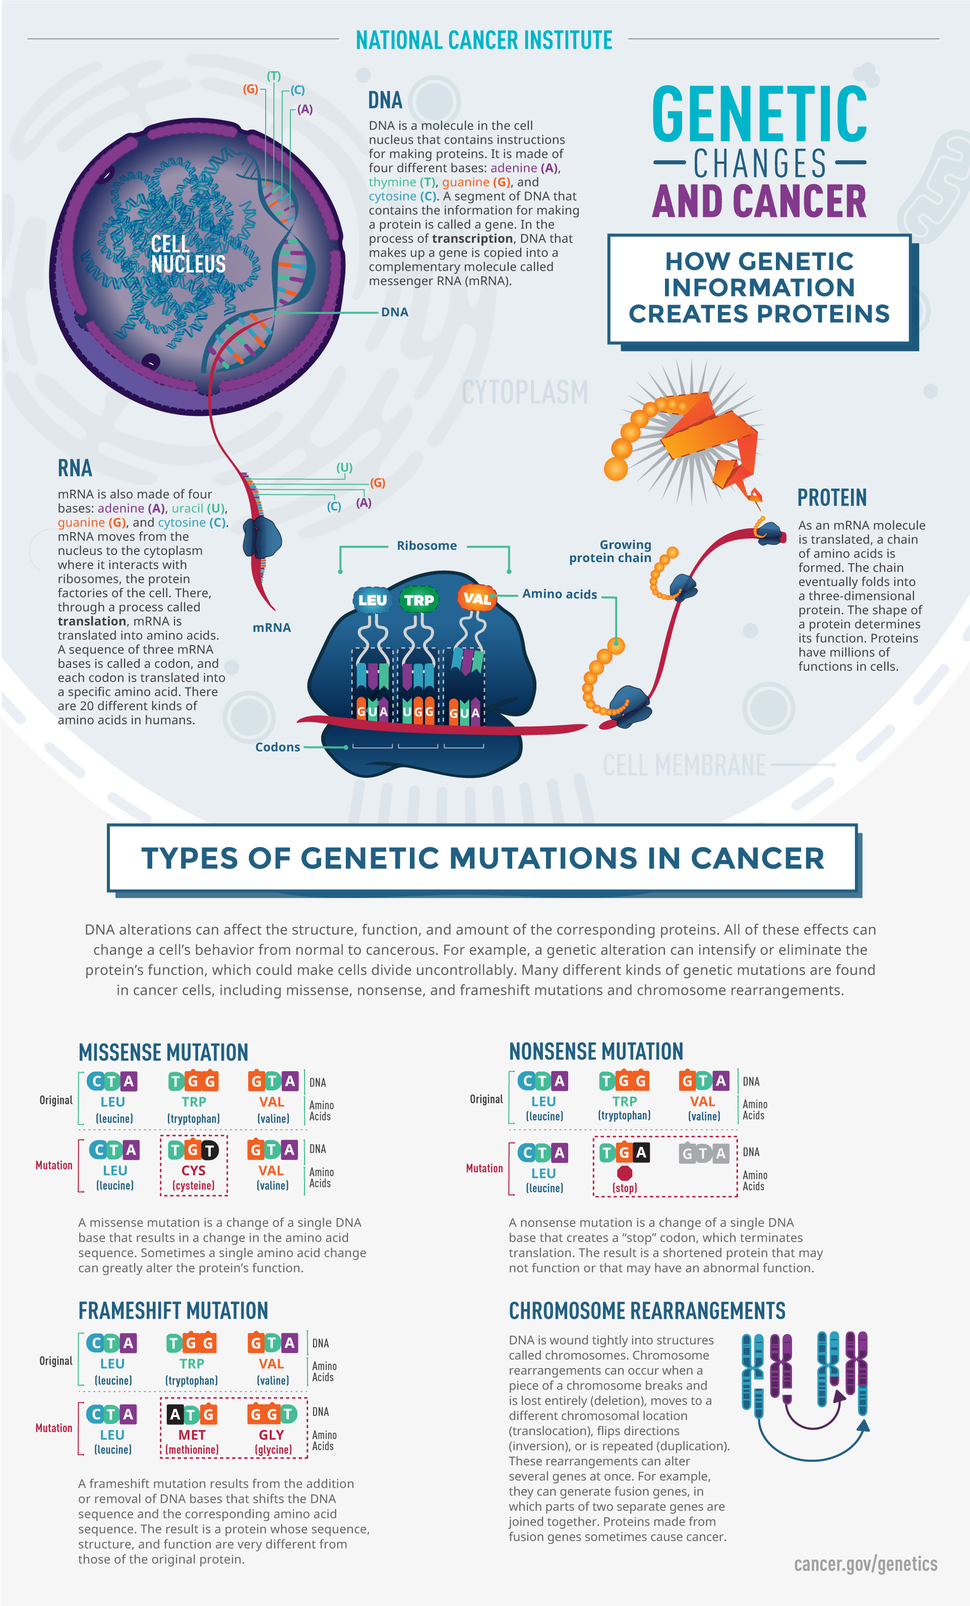 NCI Genetic Changes and Cancer. Shows how genetic information creates proteins; DNA, RNA and Protein. The four types of genetic mutations in cancer are missense mutation, frameshift mutation nonsense mutation and chromosome rearrangements.